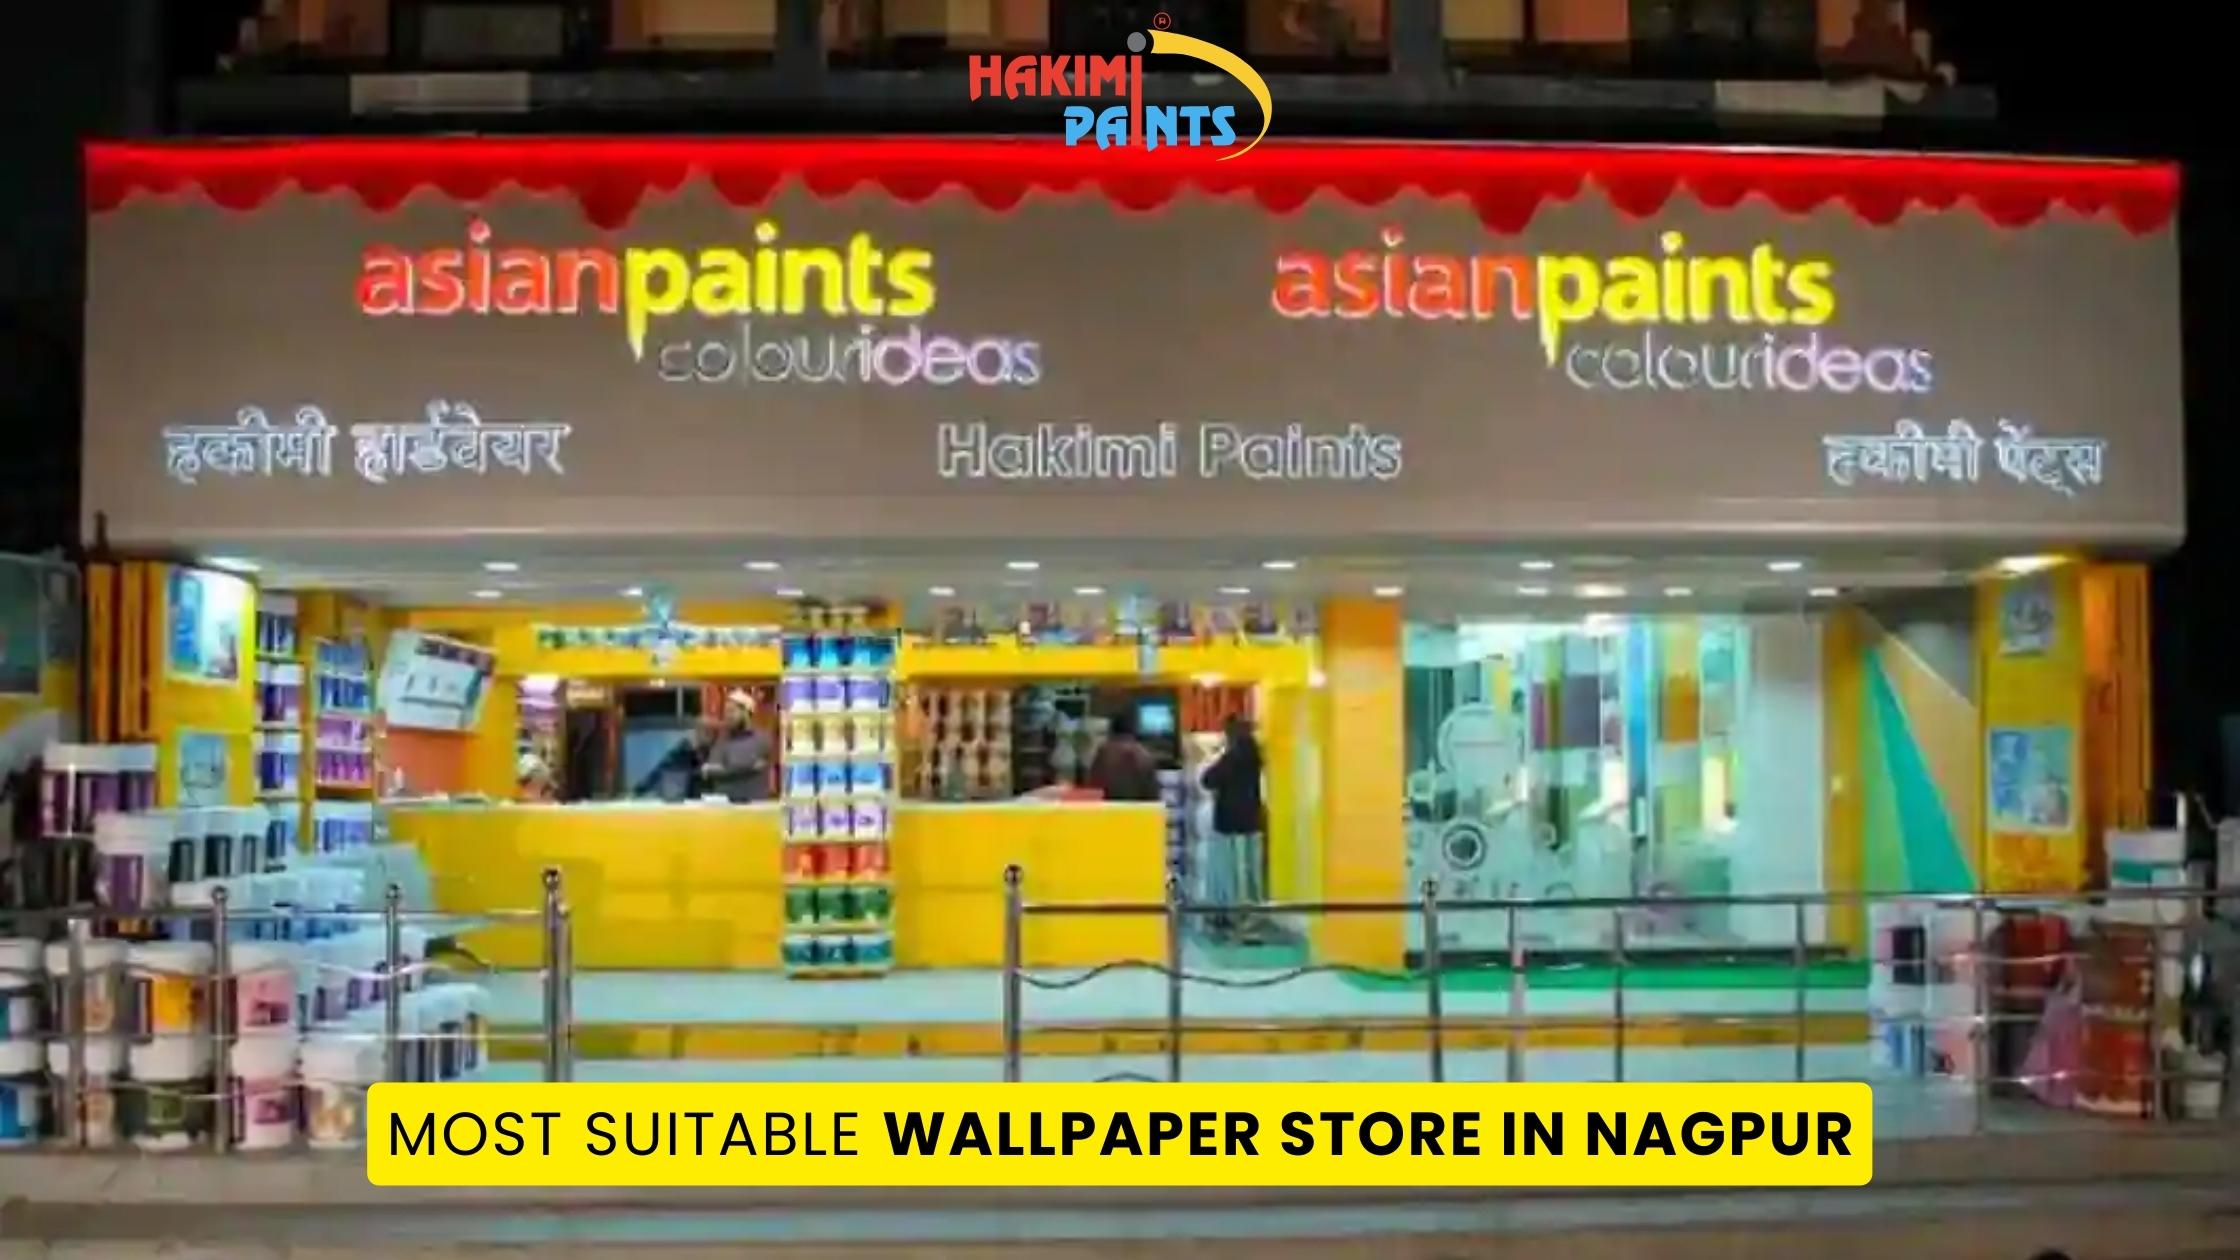 How to Find the Most Suitable Wallpaper Store in Nagpur